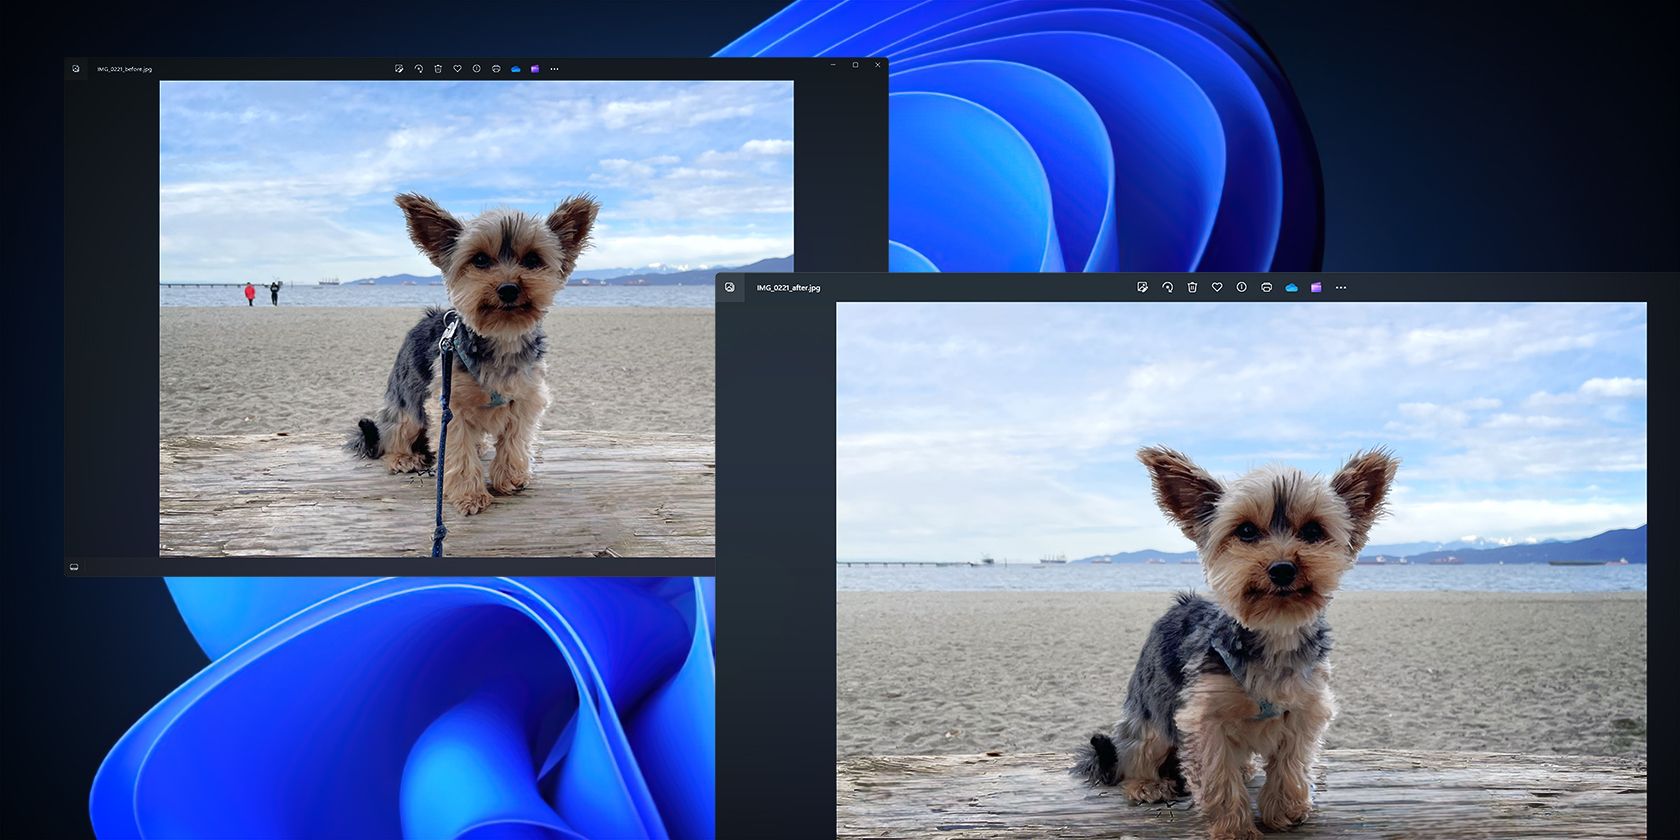 A Yorkie dog pictured on a beach appears on two different image editors on a desktop with a Windows wallpaper.